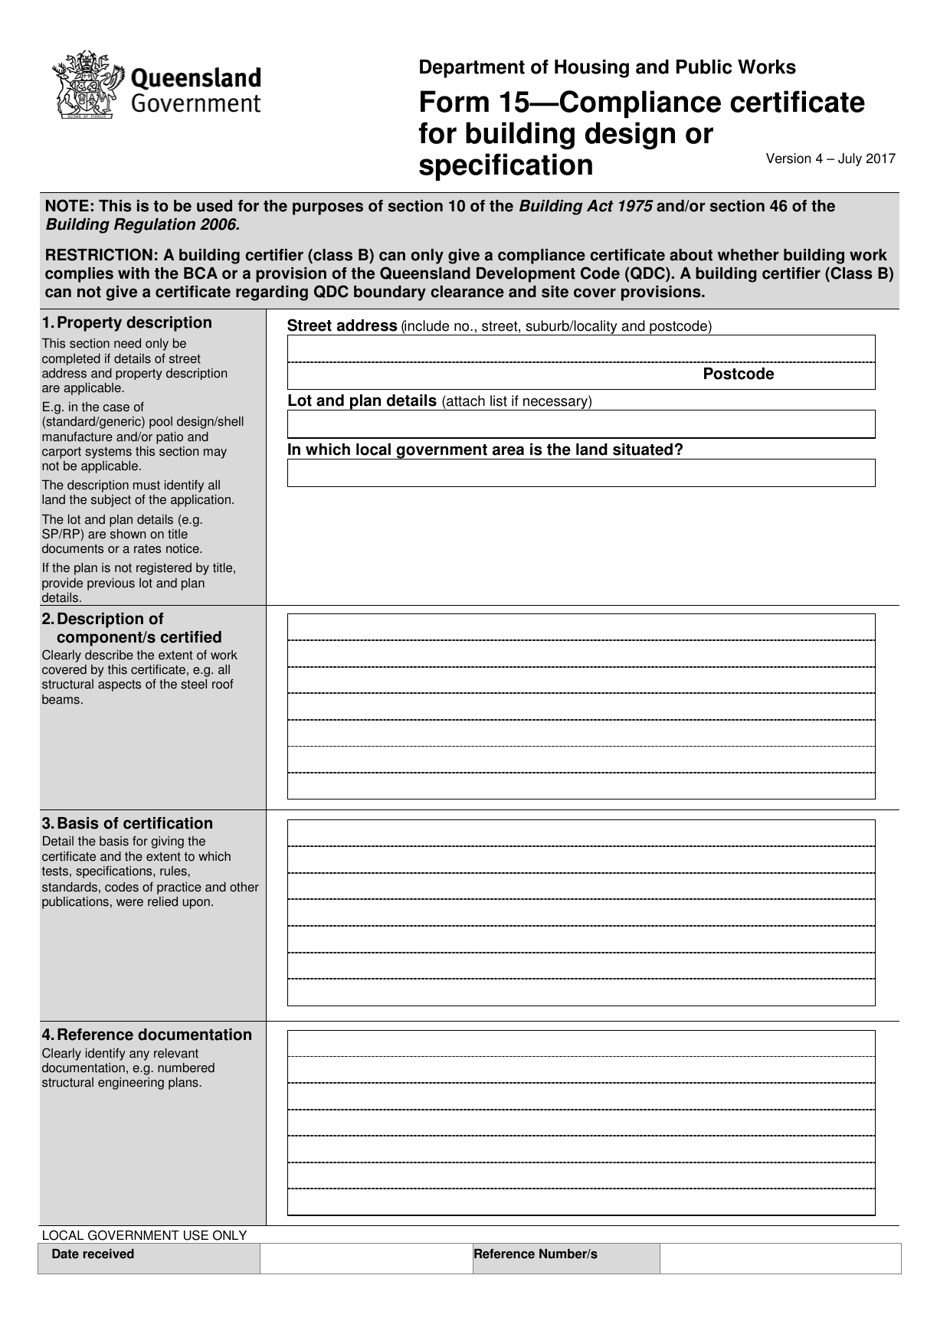 form-15-download-printable-pdf-or-fill-online-compliance-certificate